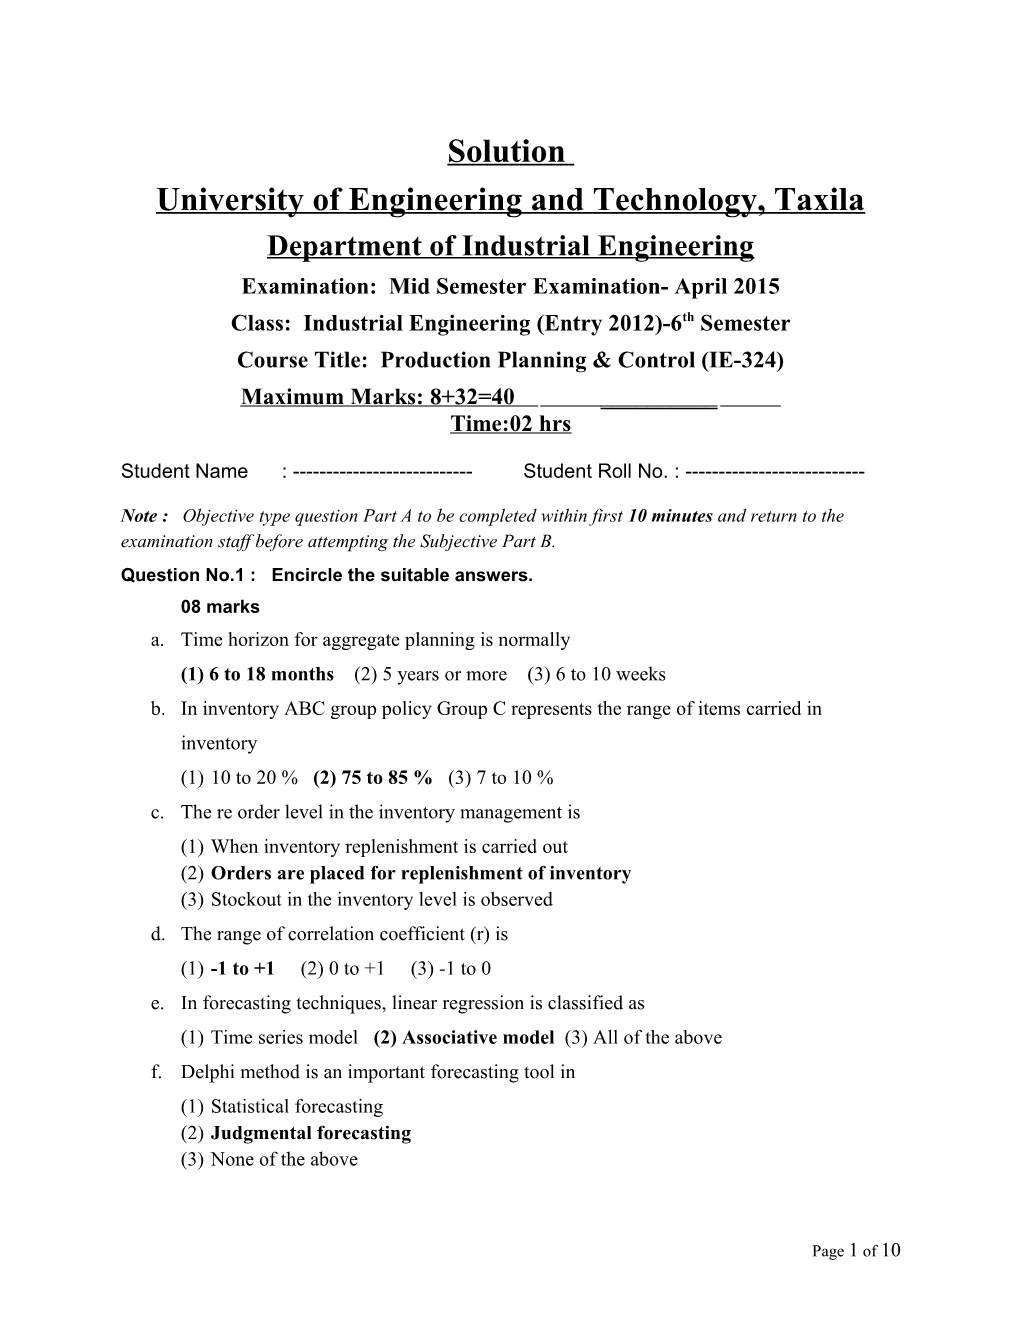 University of Engineering and Technology, Taxila s3